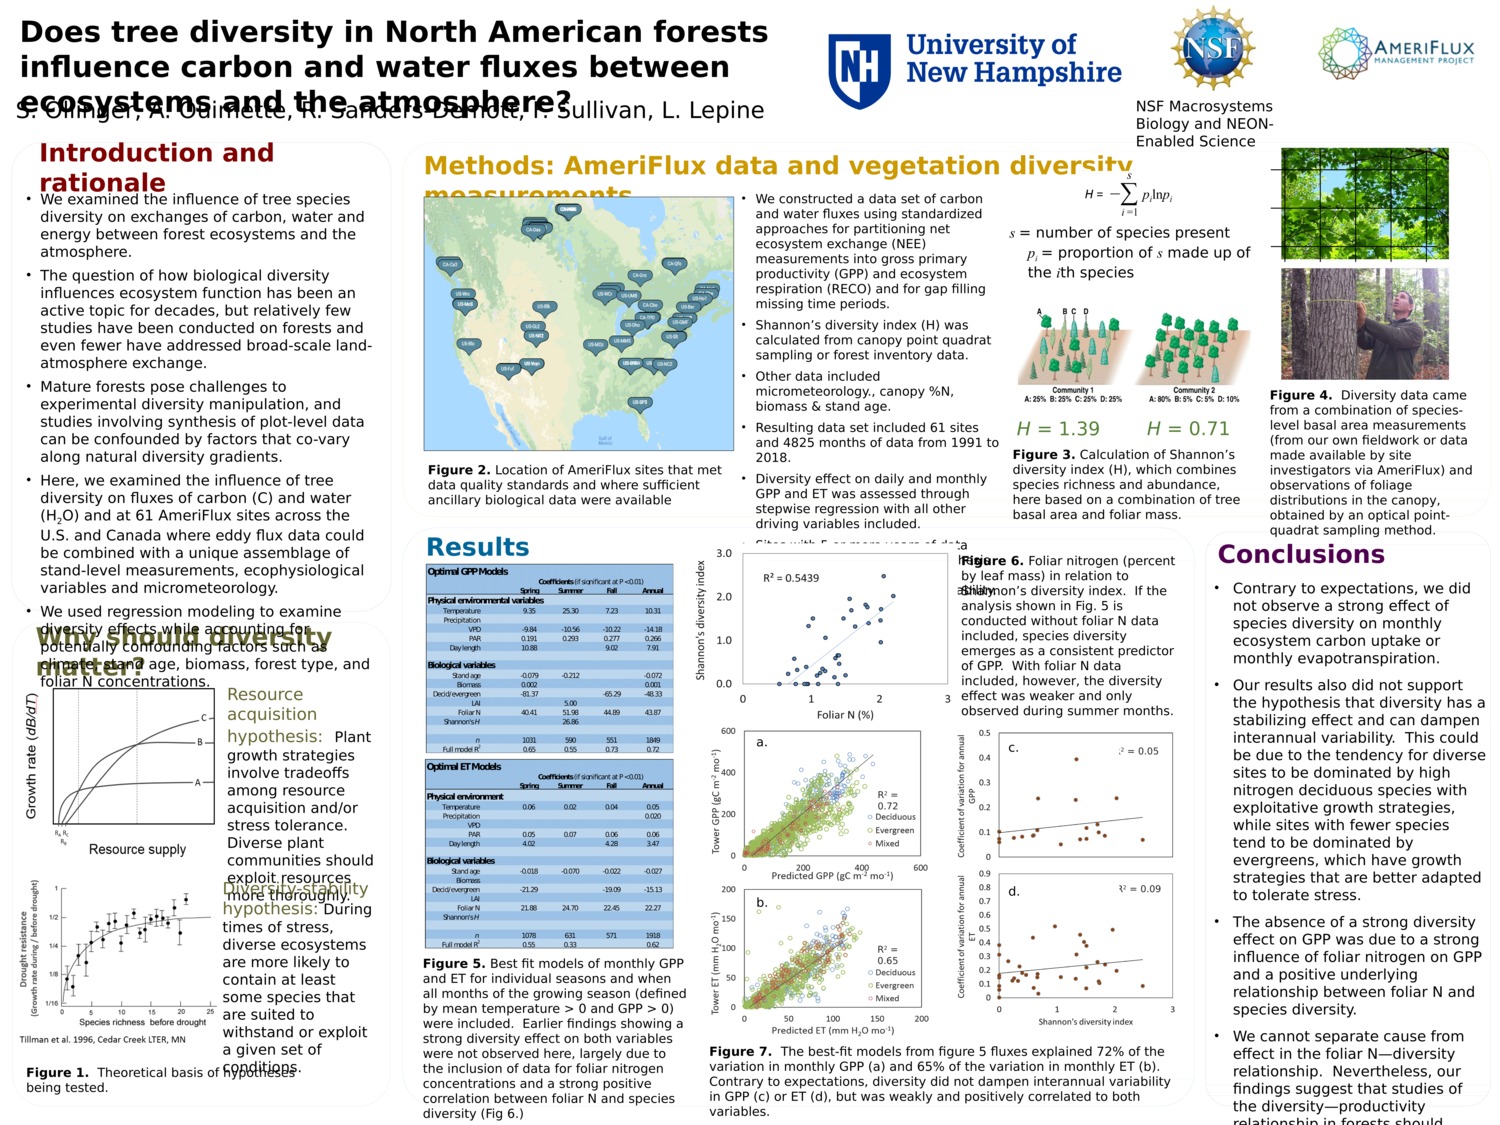 Does Tree Diversity In North American Forests Influence Carbon And Water Fluxes Between Ecosystems And The Atmosphere? by svollinger